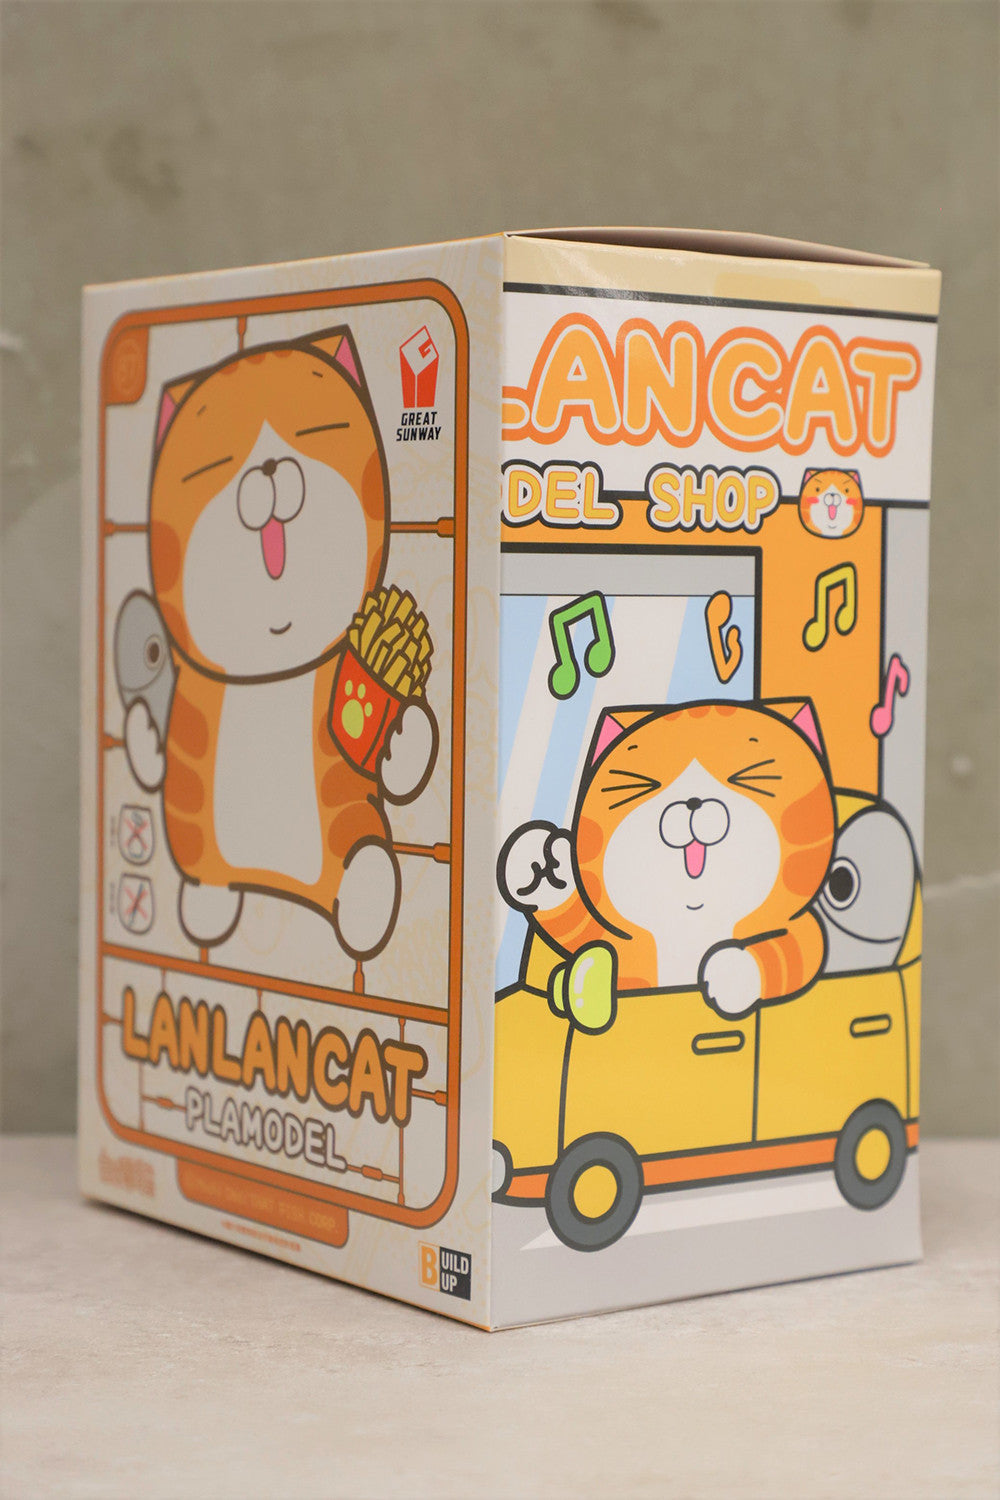 LanLan Cat licensed product by Great Sunway